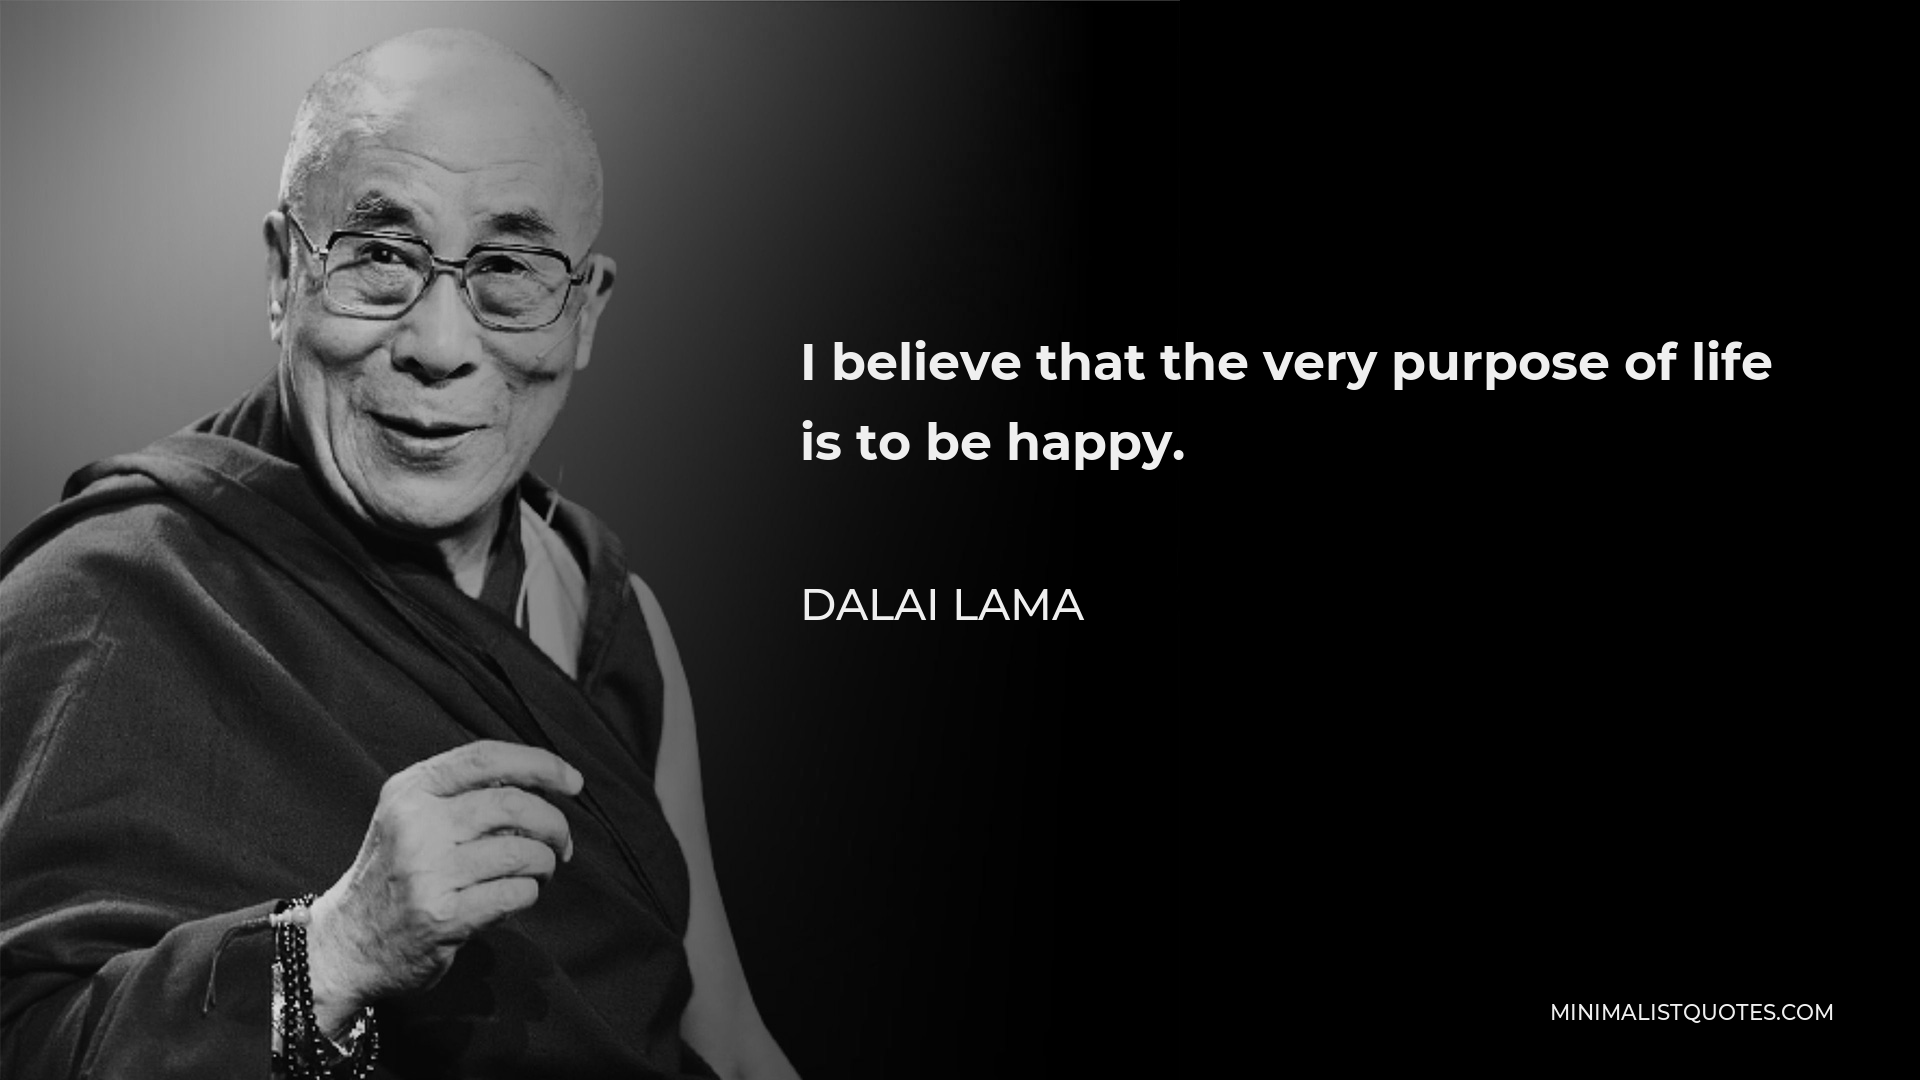 Dalai Lama Quote - I believe that the very purpose of life is to be happy.